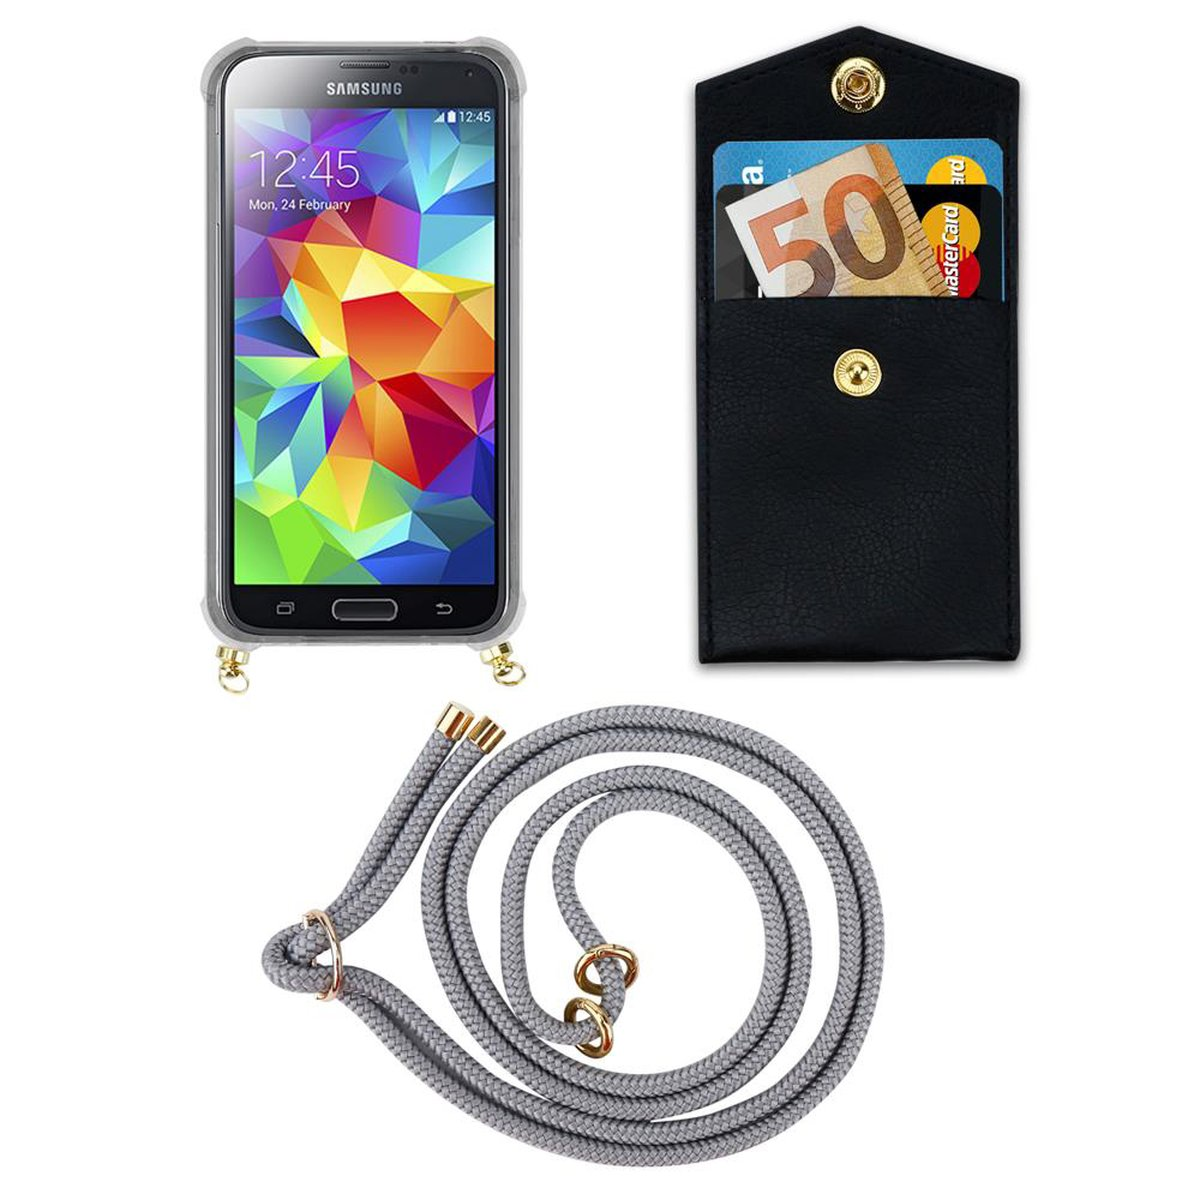 NEO, Ringen, Kette und Gold S5 CADORABO S5 Galaxy Handy SILBER Samsung, Backcover, Hülle, abnehmbarer / GRAU mit Kordel Band